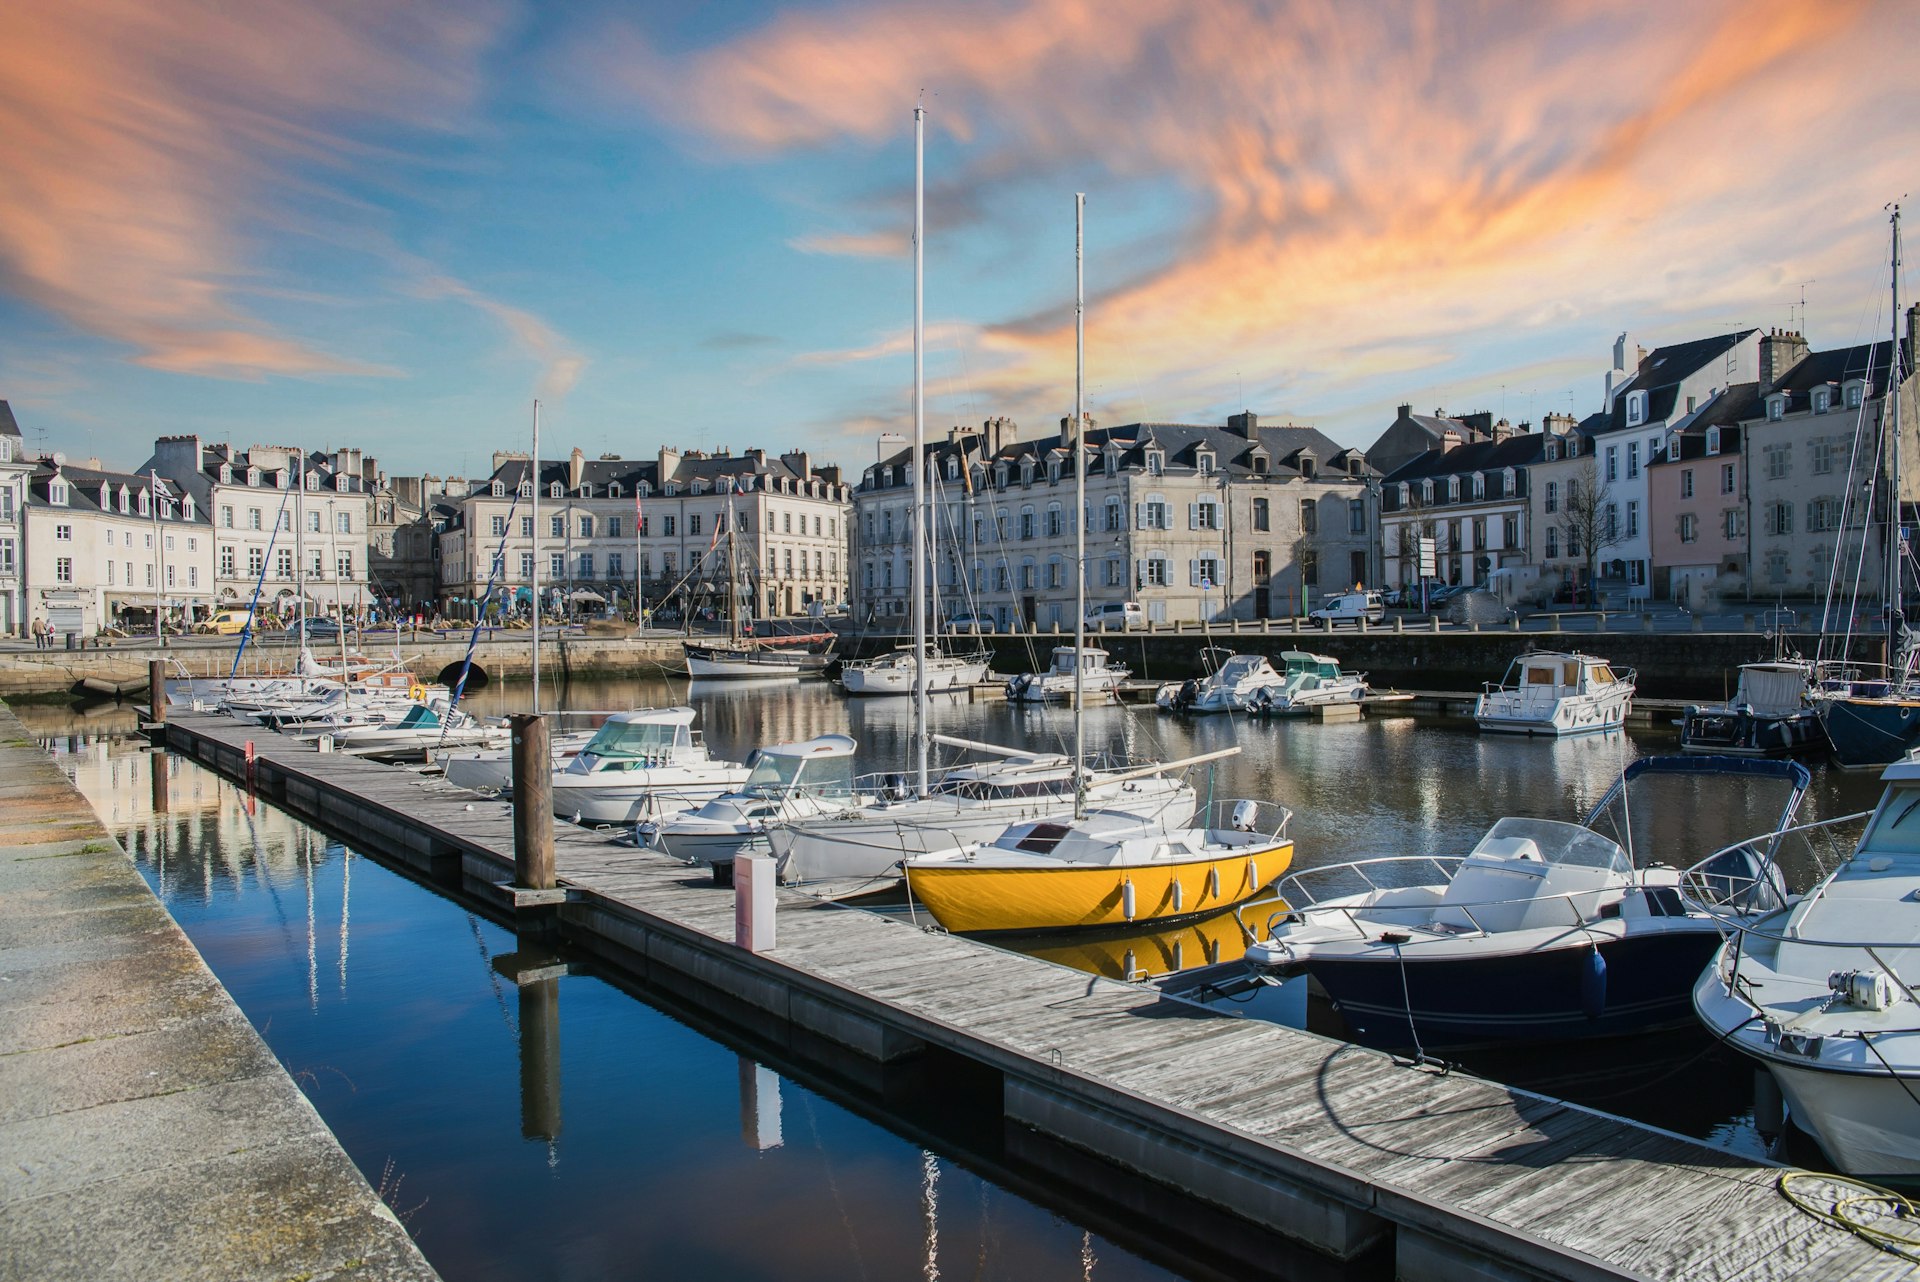 Vannes, medieval city in Brittany, with boats in the harbor and typical houses in the background, France 